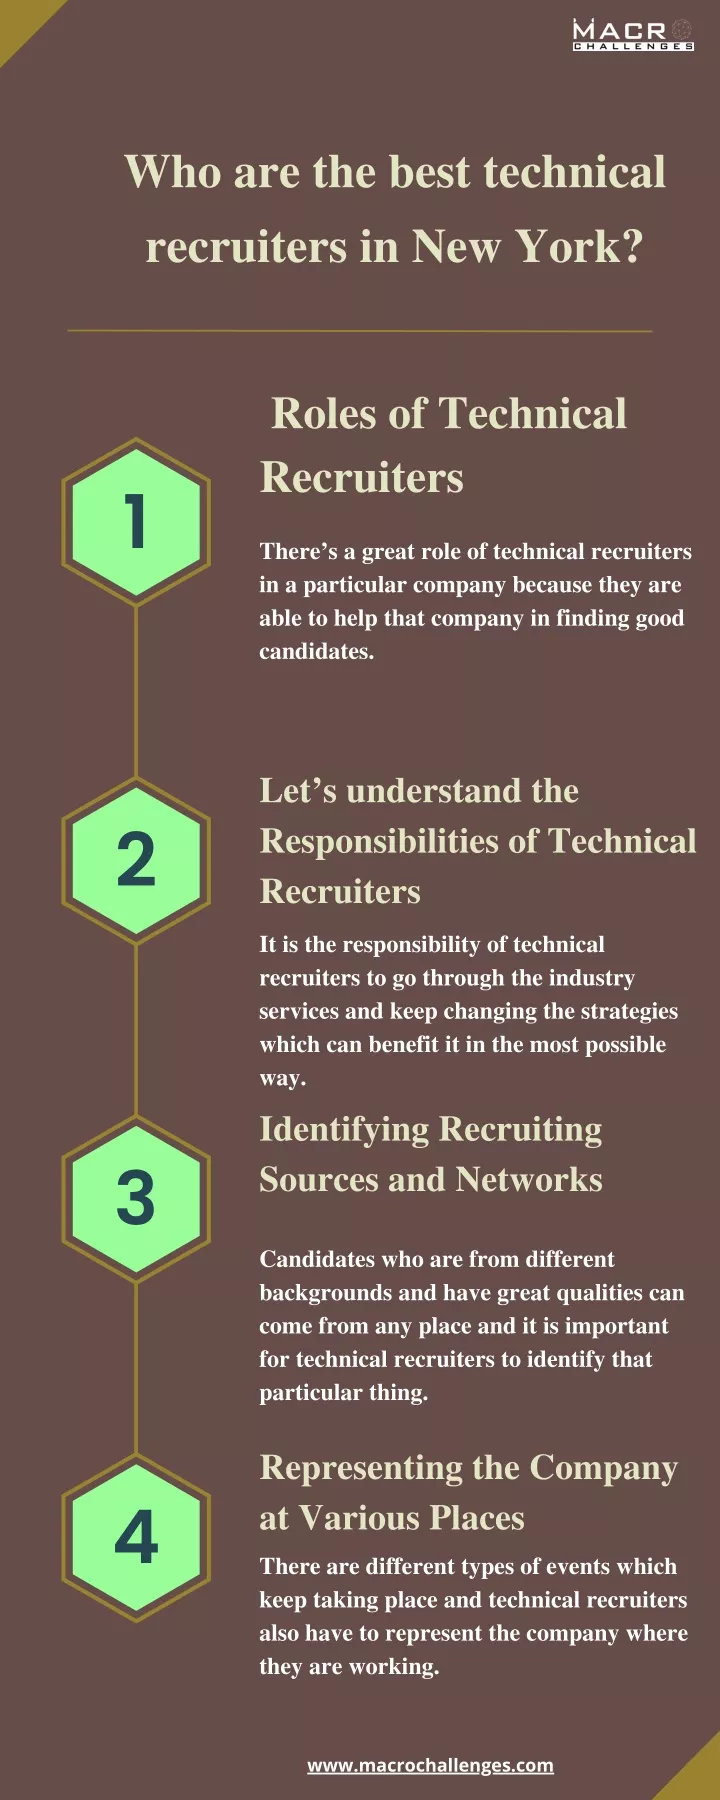 who are the best technical recruiters in new york